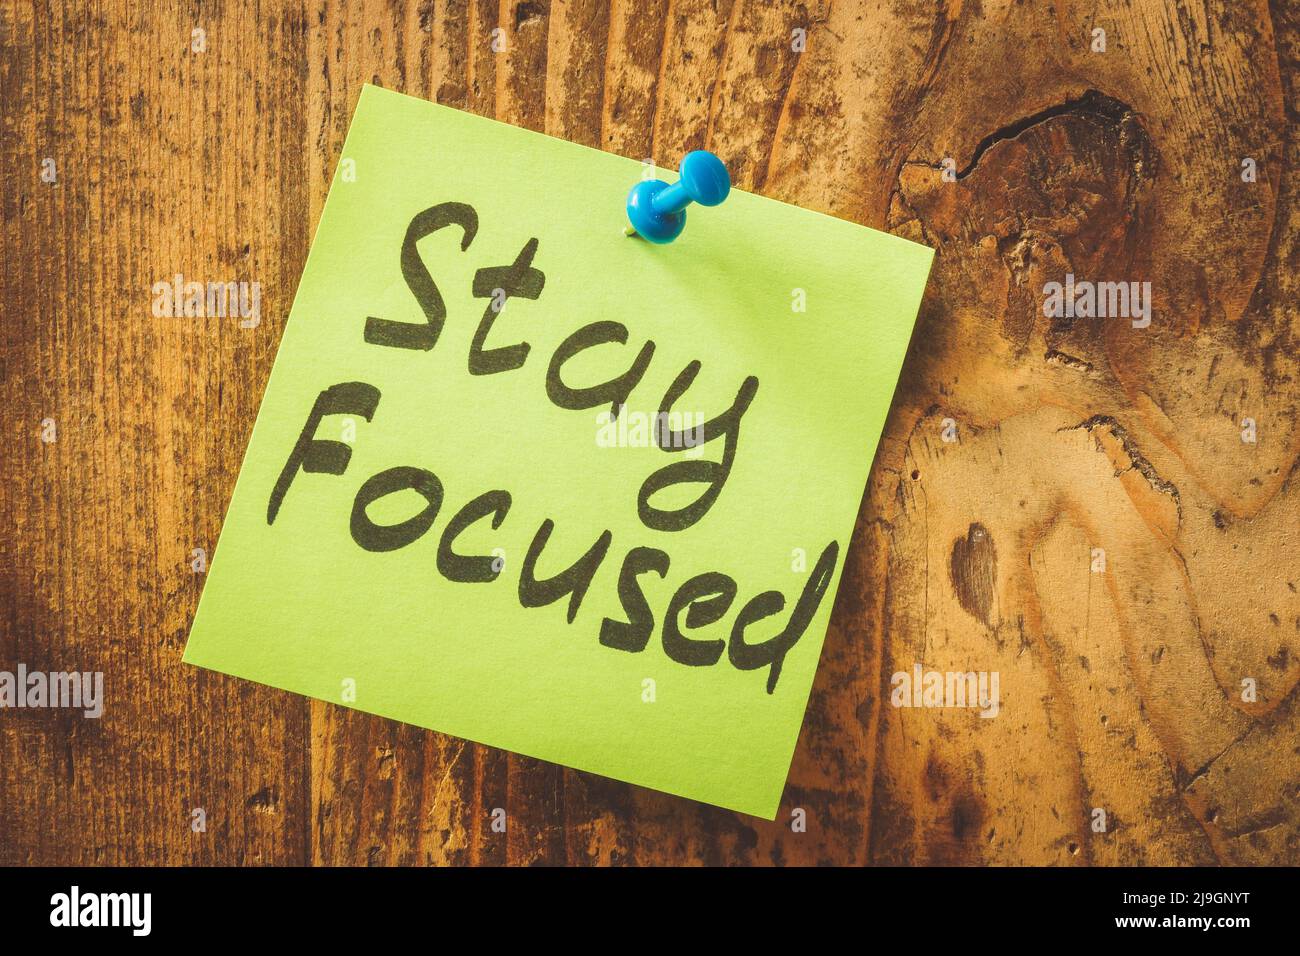 Stay focused lettering on sticker attached to board. Stock Photo